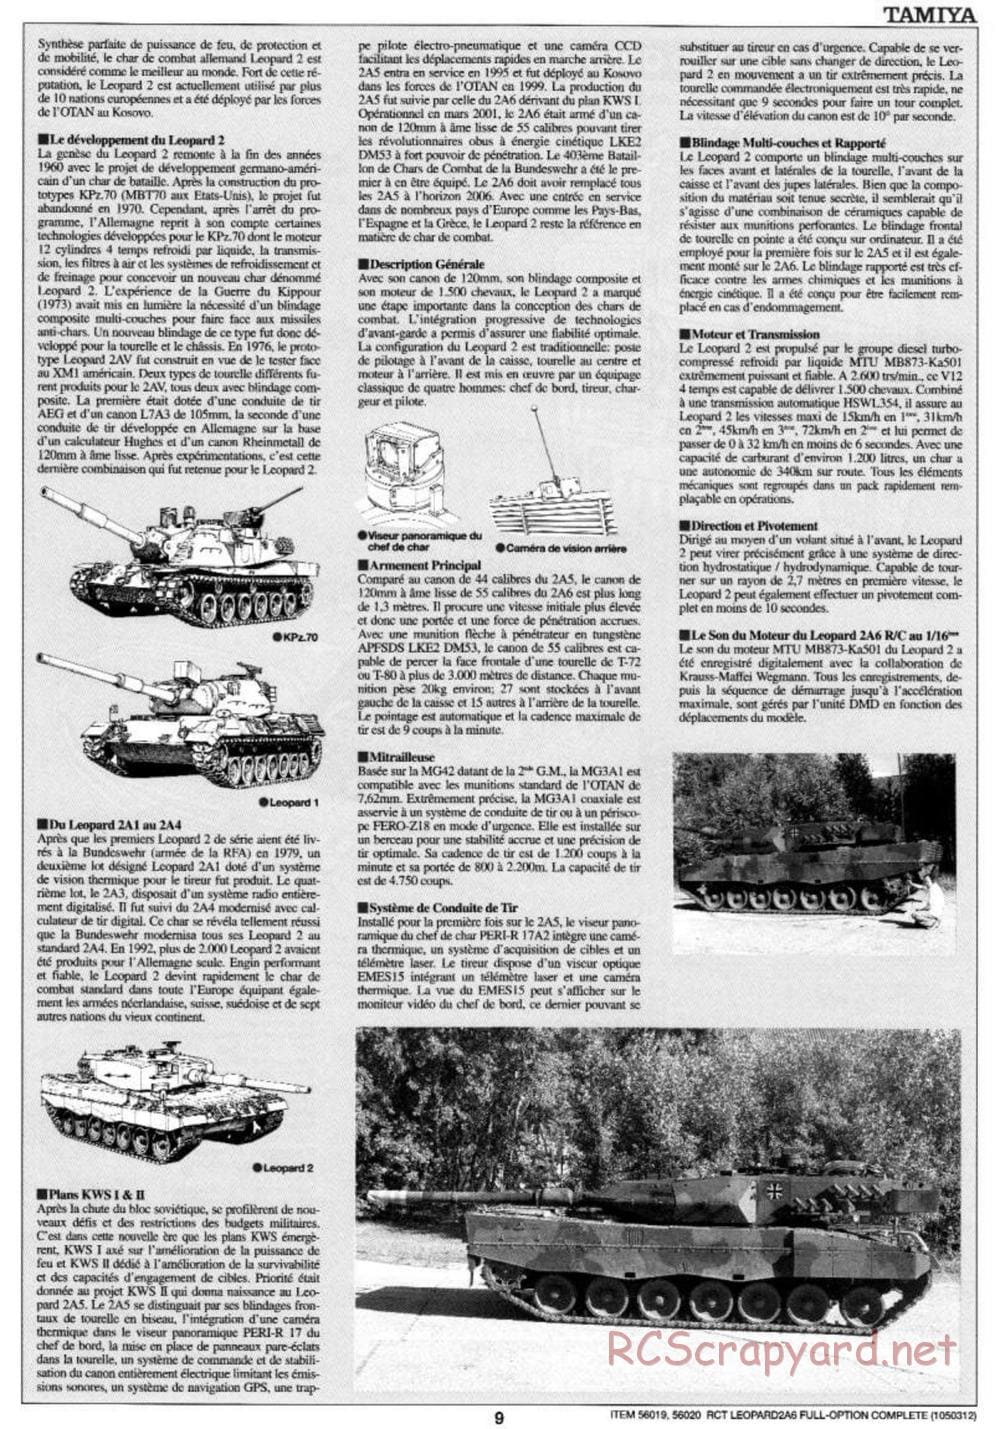 Tamiya - Leopard 2 A6 - 1/16 Scale Chassis - Manual - Page 9